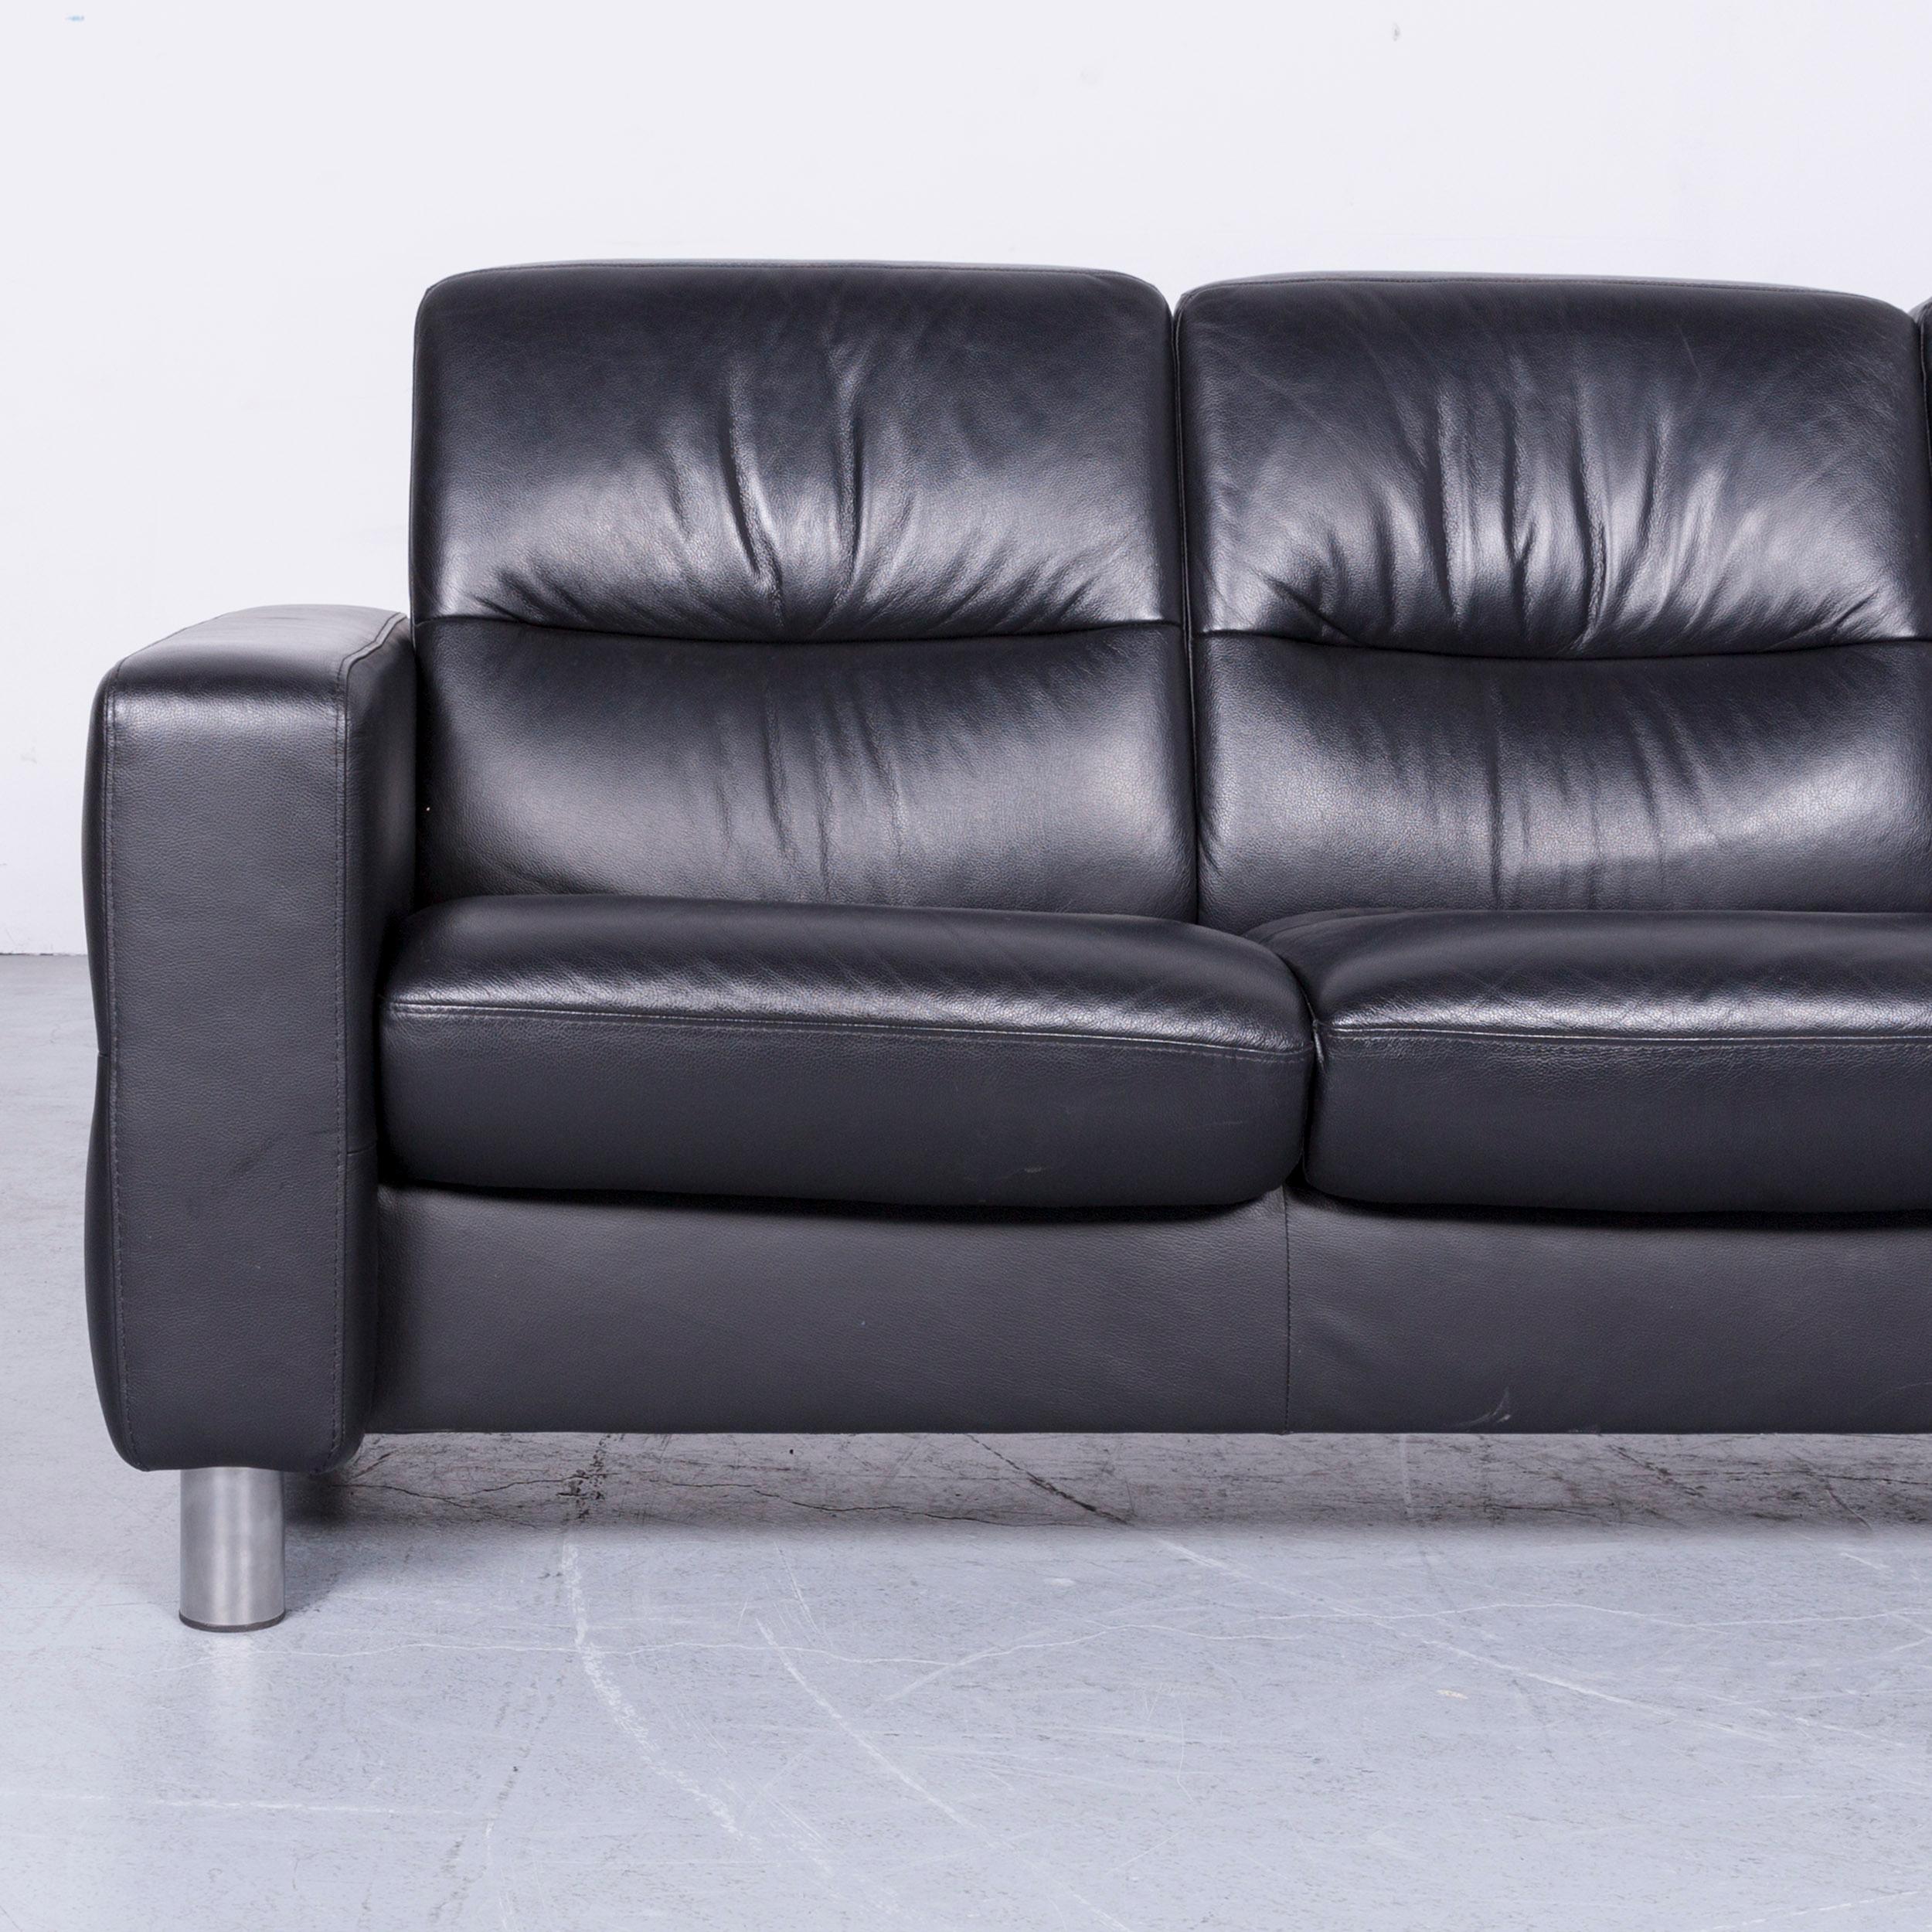 Ekornes Stressless Relax Sofa Black Leather TV Recliner Three-Seat In Good Condition For Sale In Cologne, DE